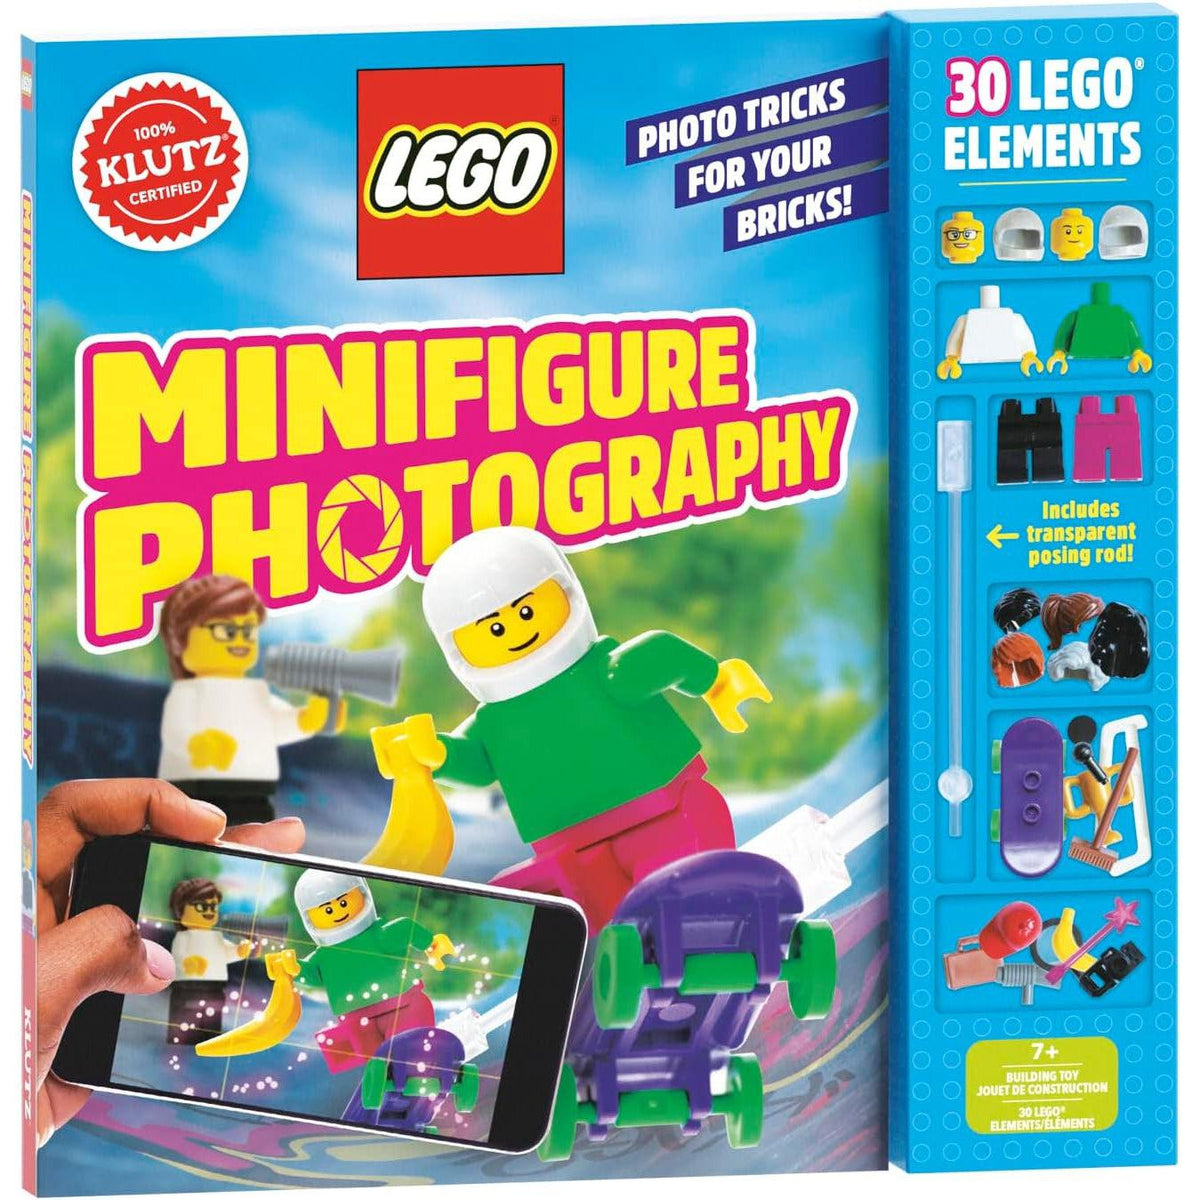 Front view of the LEGO Minifigure Photography kit.